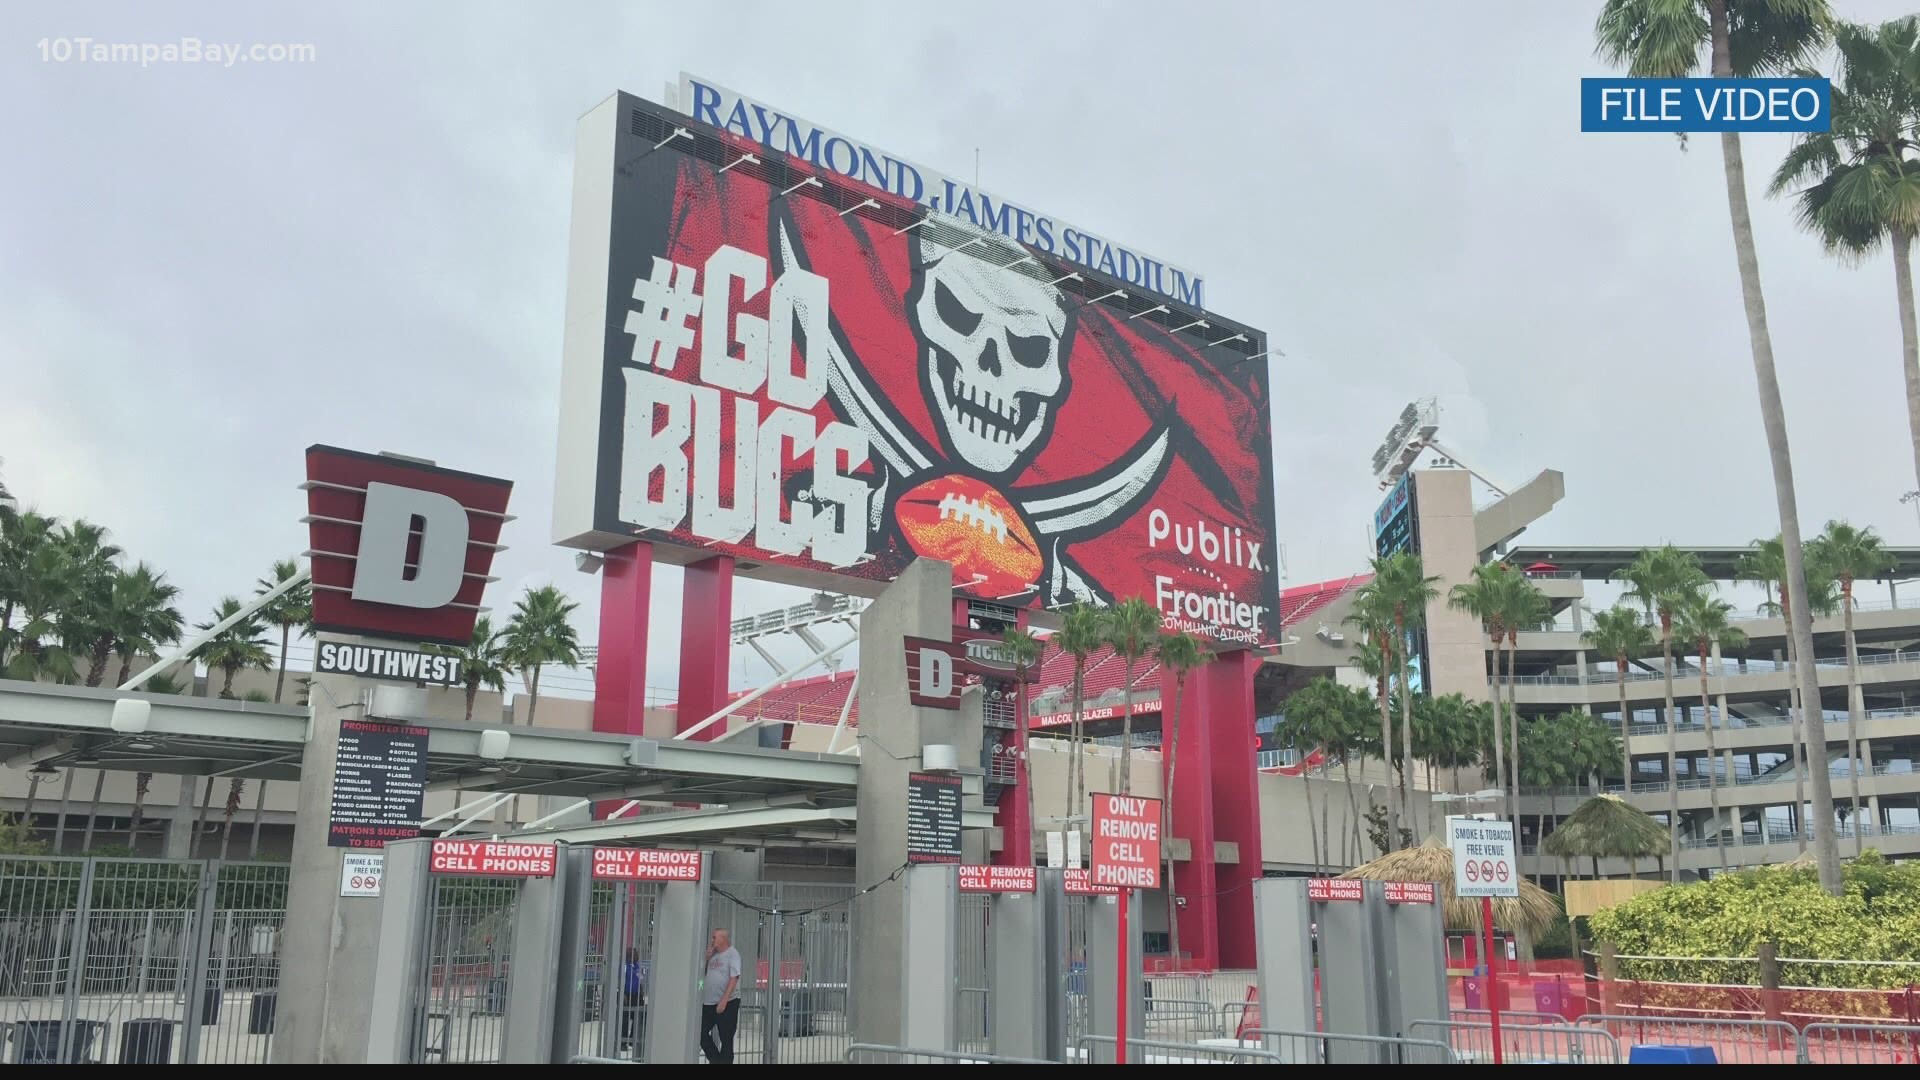 Tampa Bay Buccaneers fans will soon be able to watch Tom Brady in person.